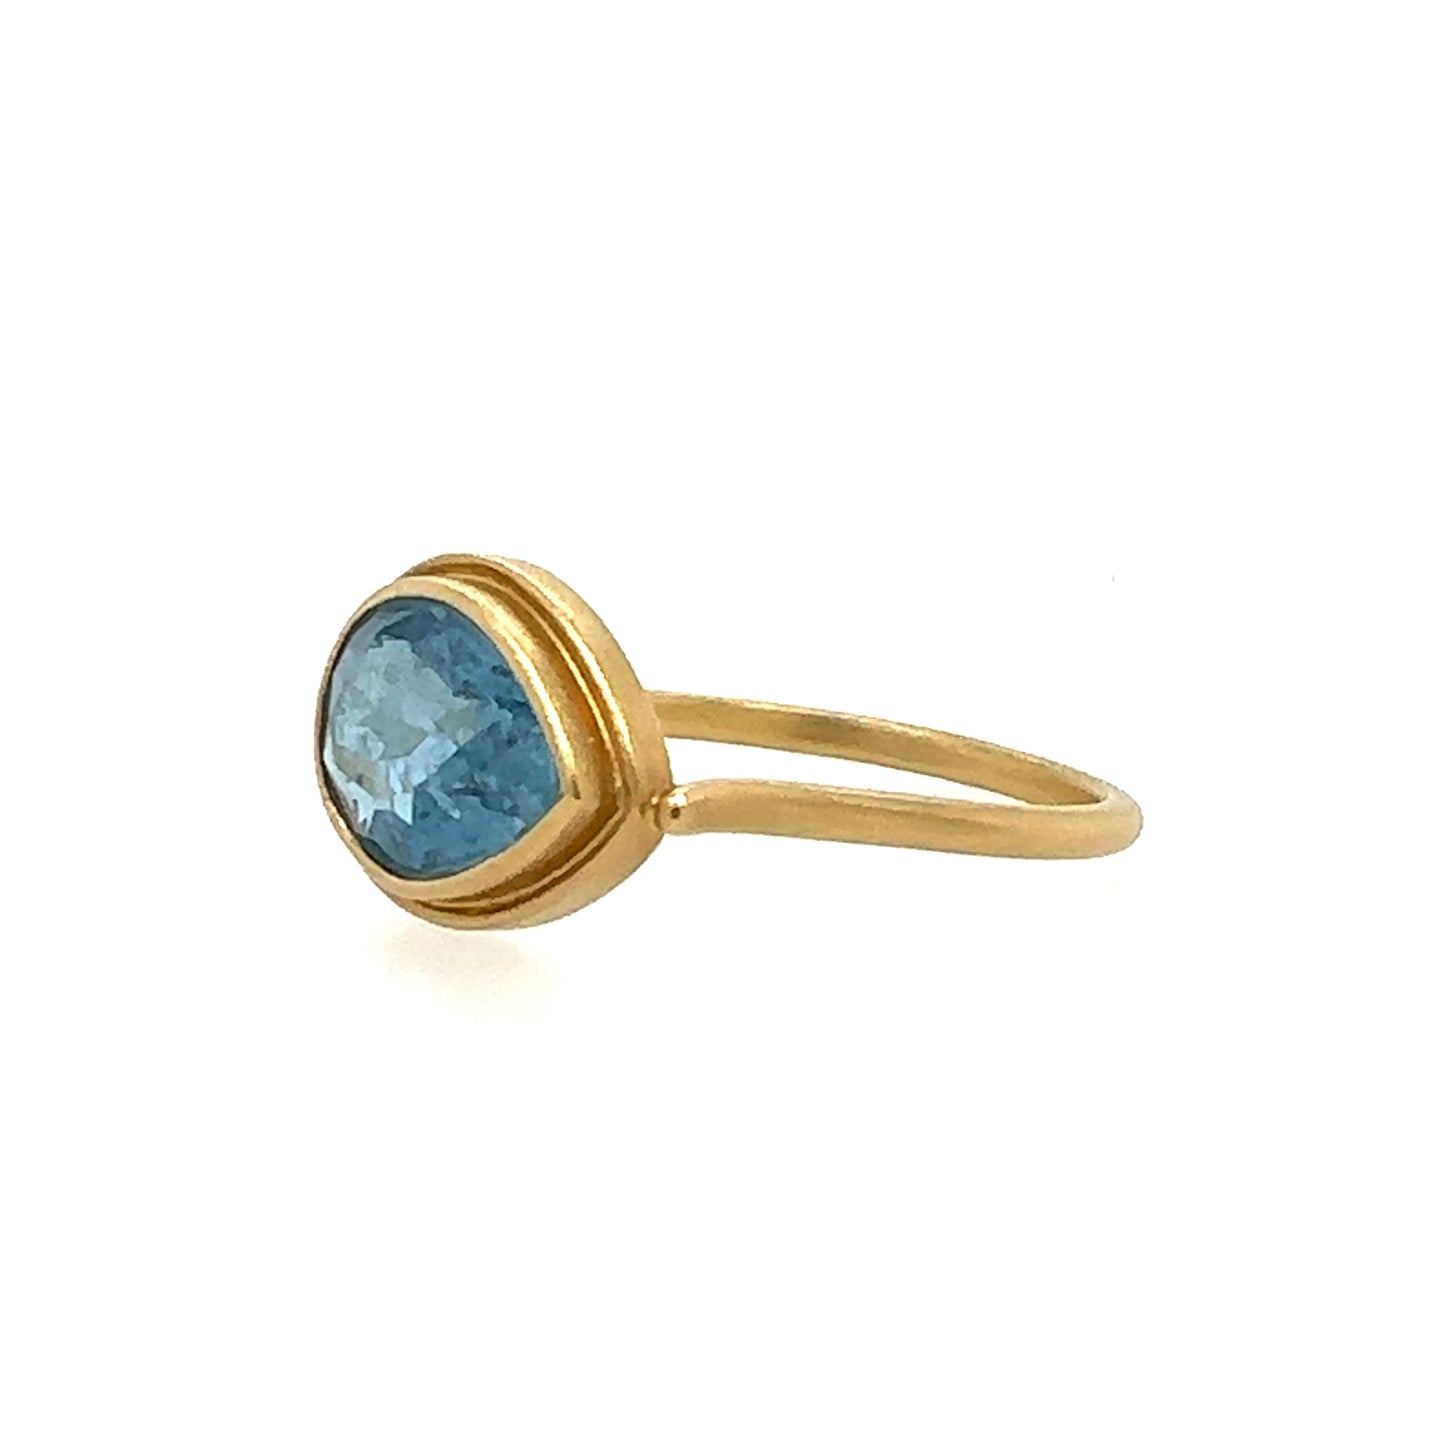 Monaka 18k Matte Gold Ring with a Pear-Shaped Aquamarine